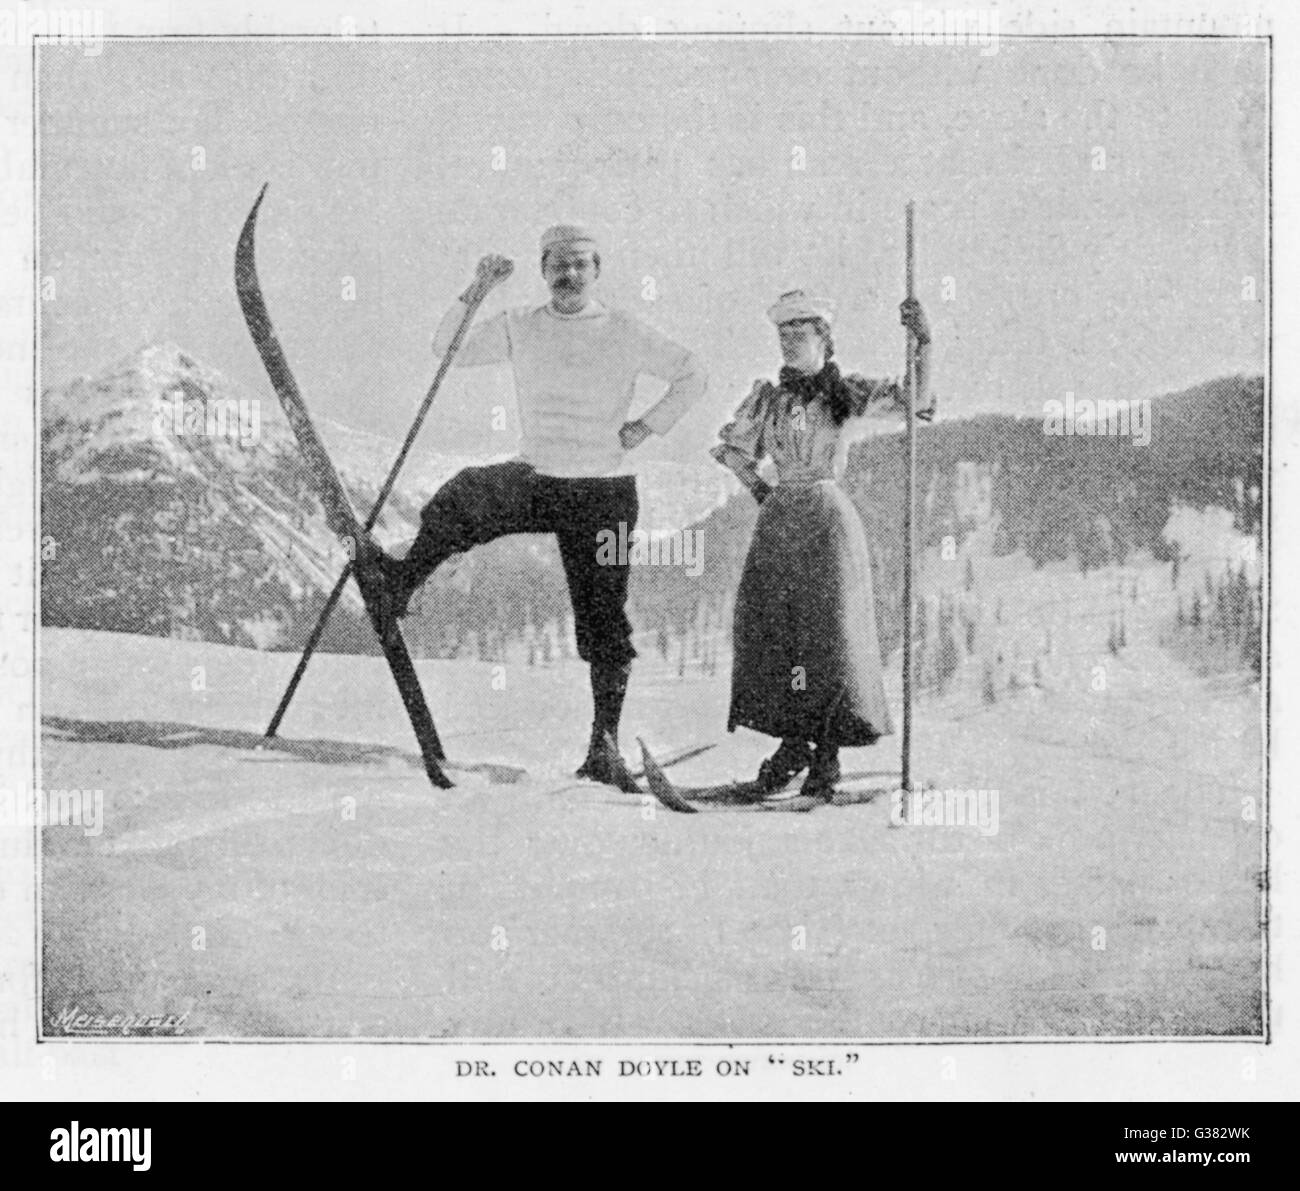 SIR ARTHUR CONAN DOYLE  In comical pose on skis in the  Alps, with female companion.       Date: 1894 Stock Photo